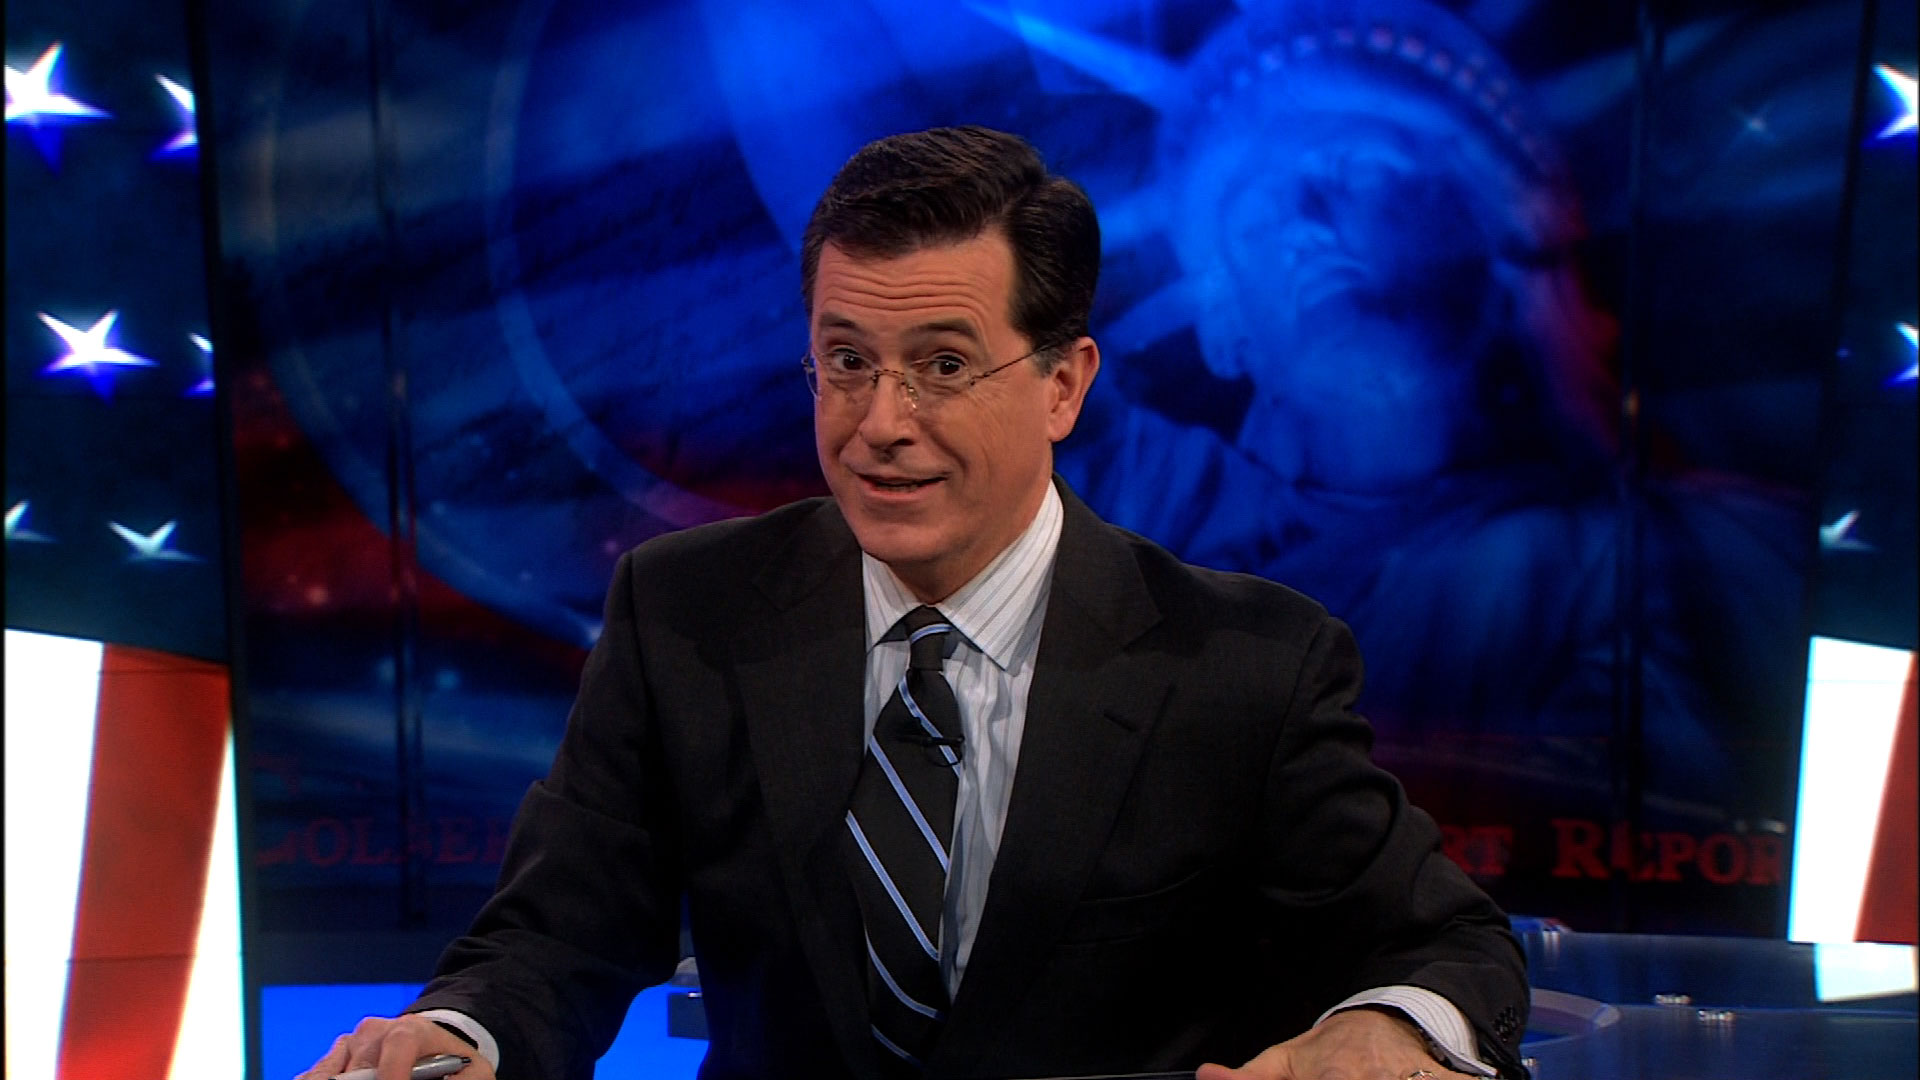 Nice Images Collection: The Colbert Report Desktop Wallpapers